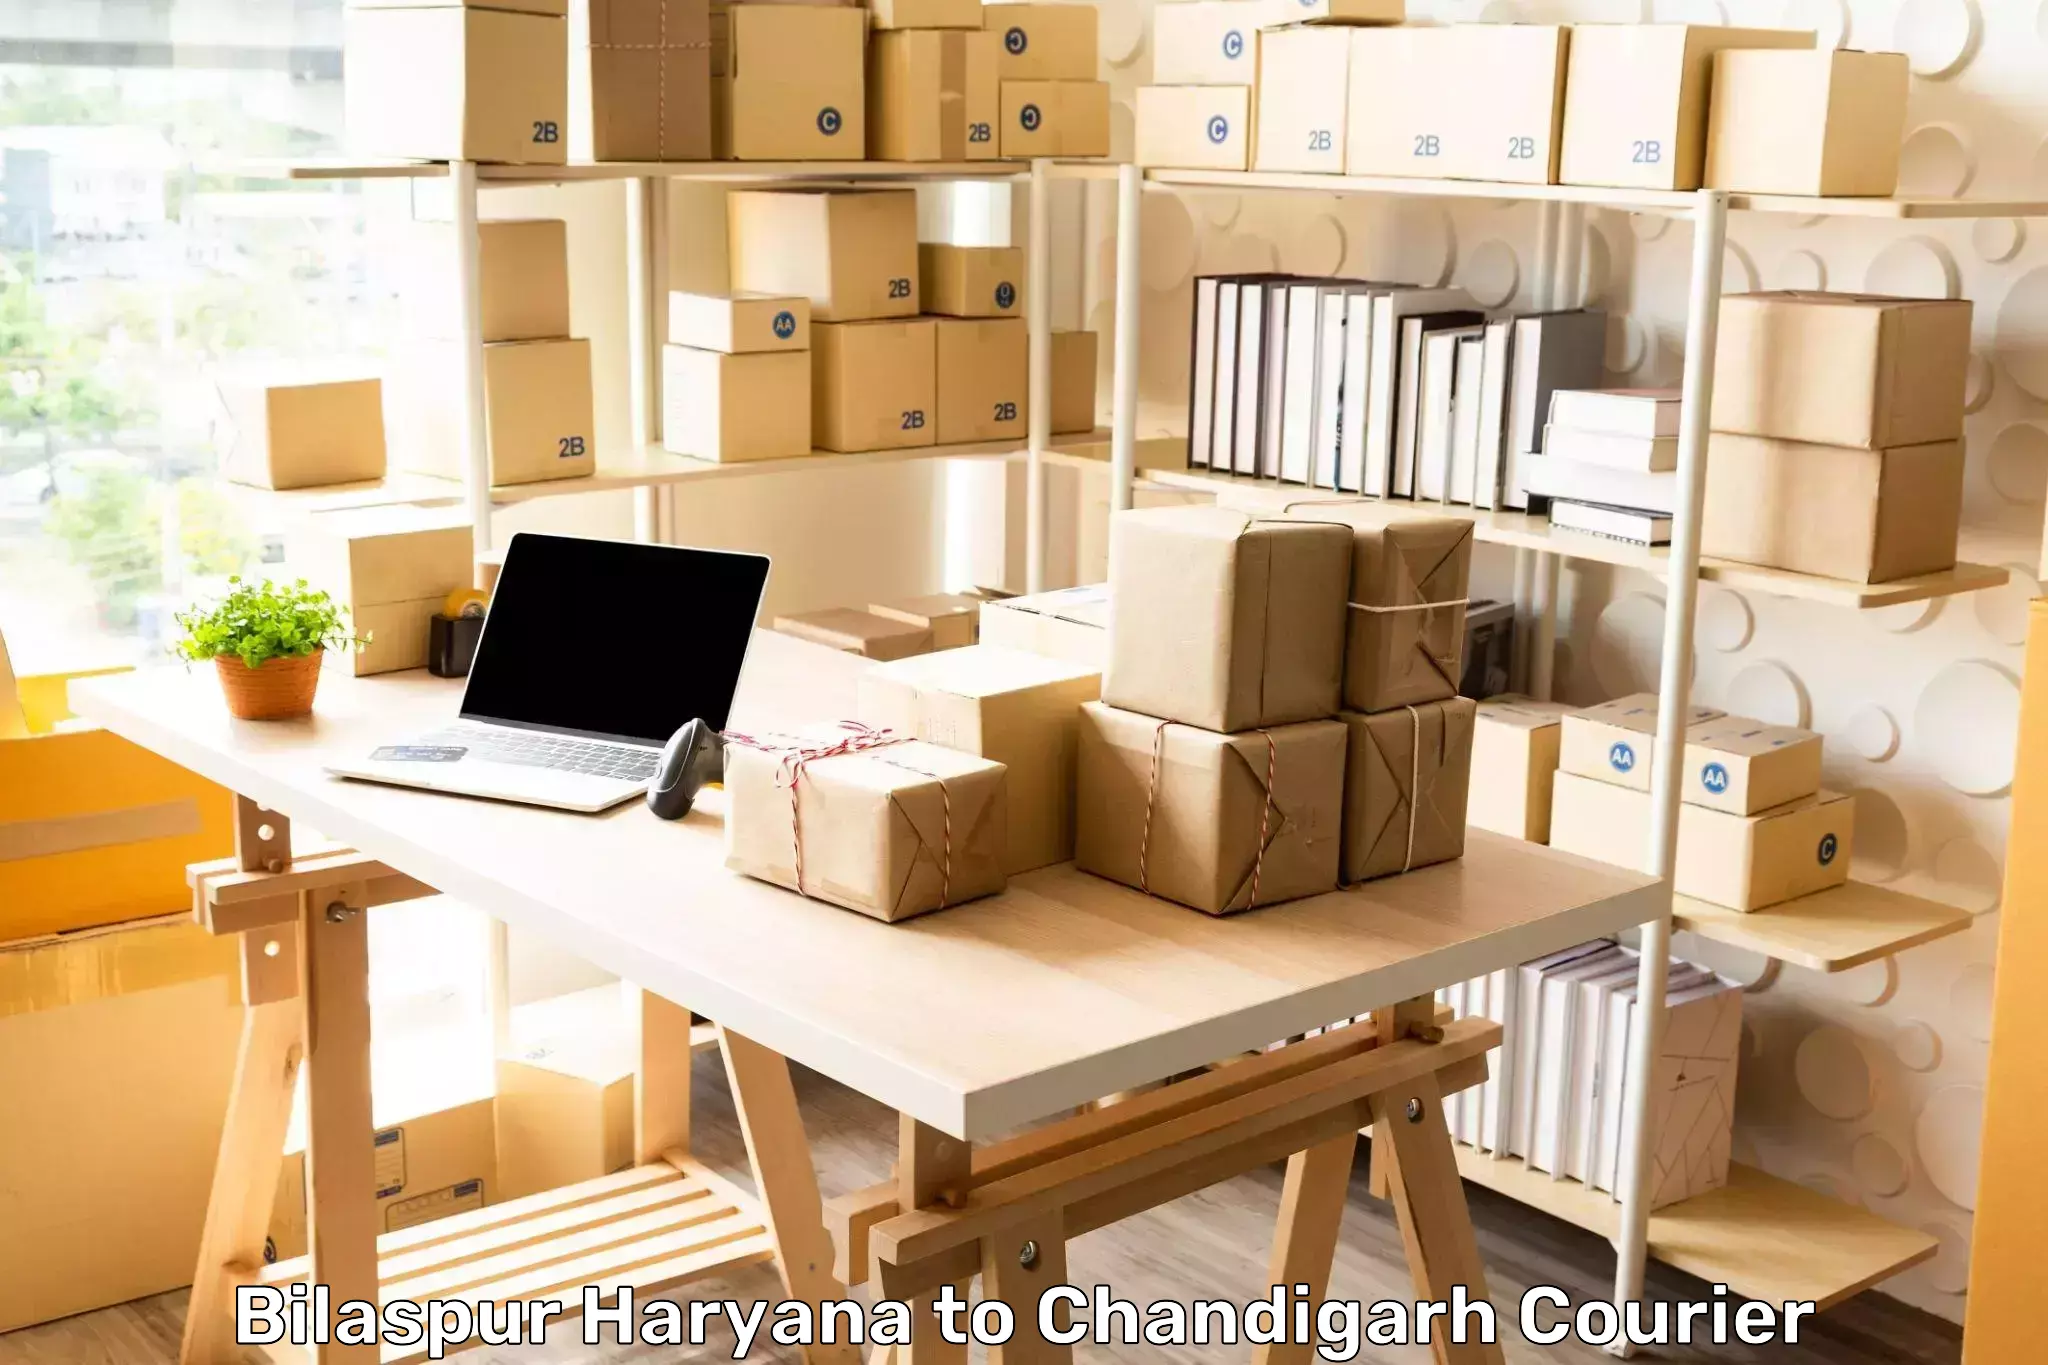 Express delivery capabilities Bilaspur Haryana to Chandigarh